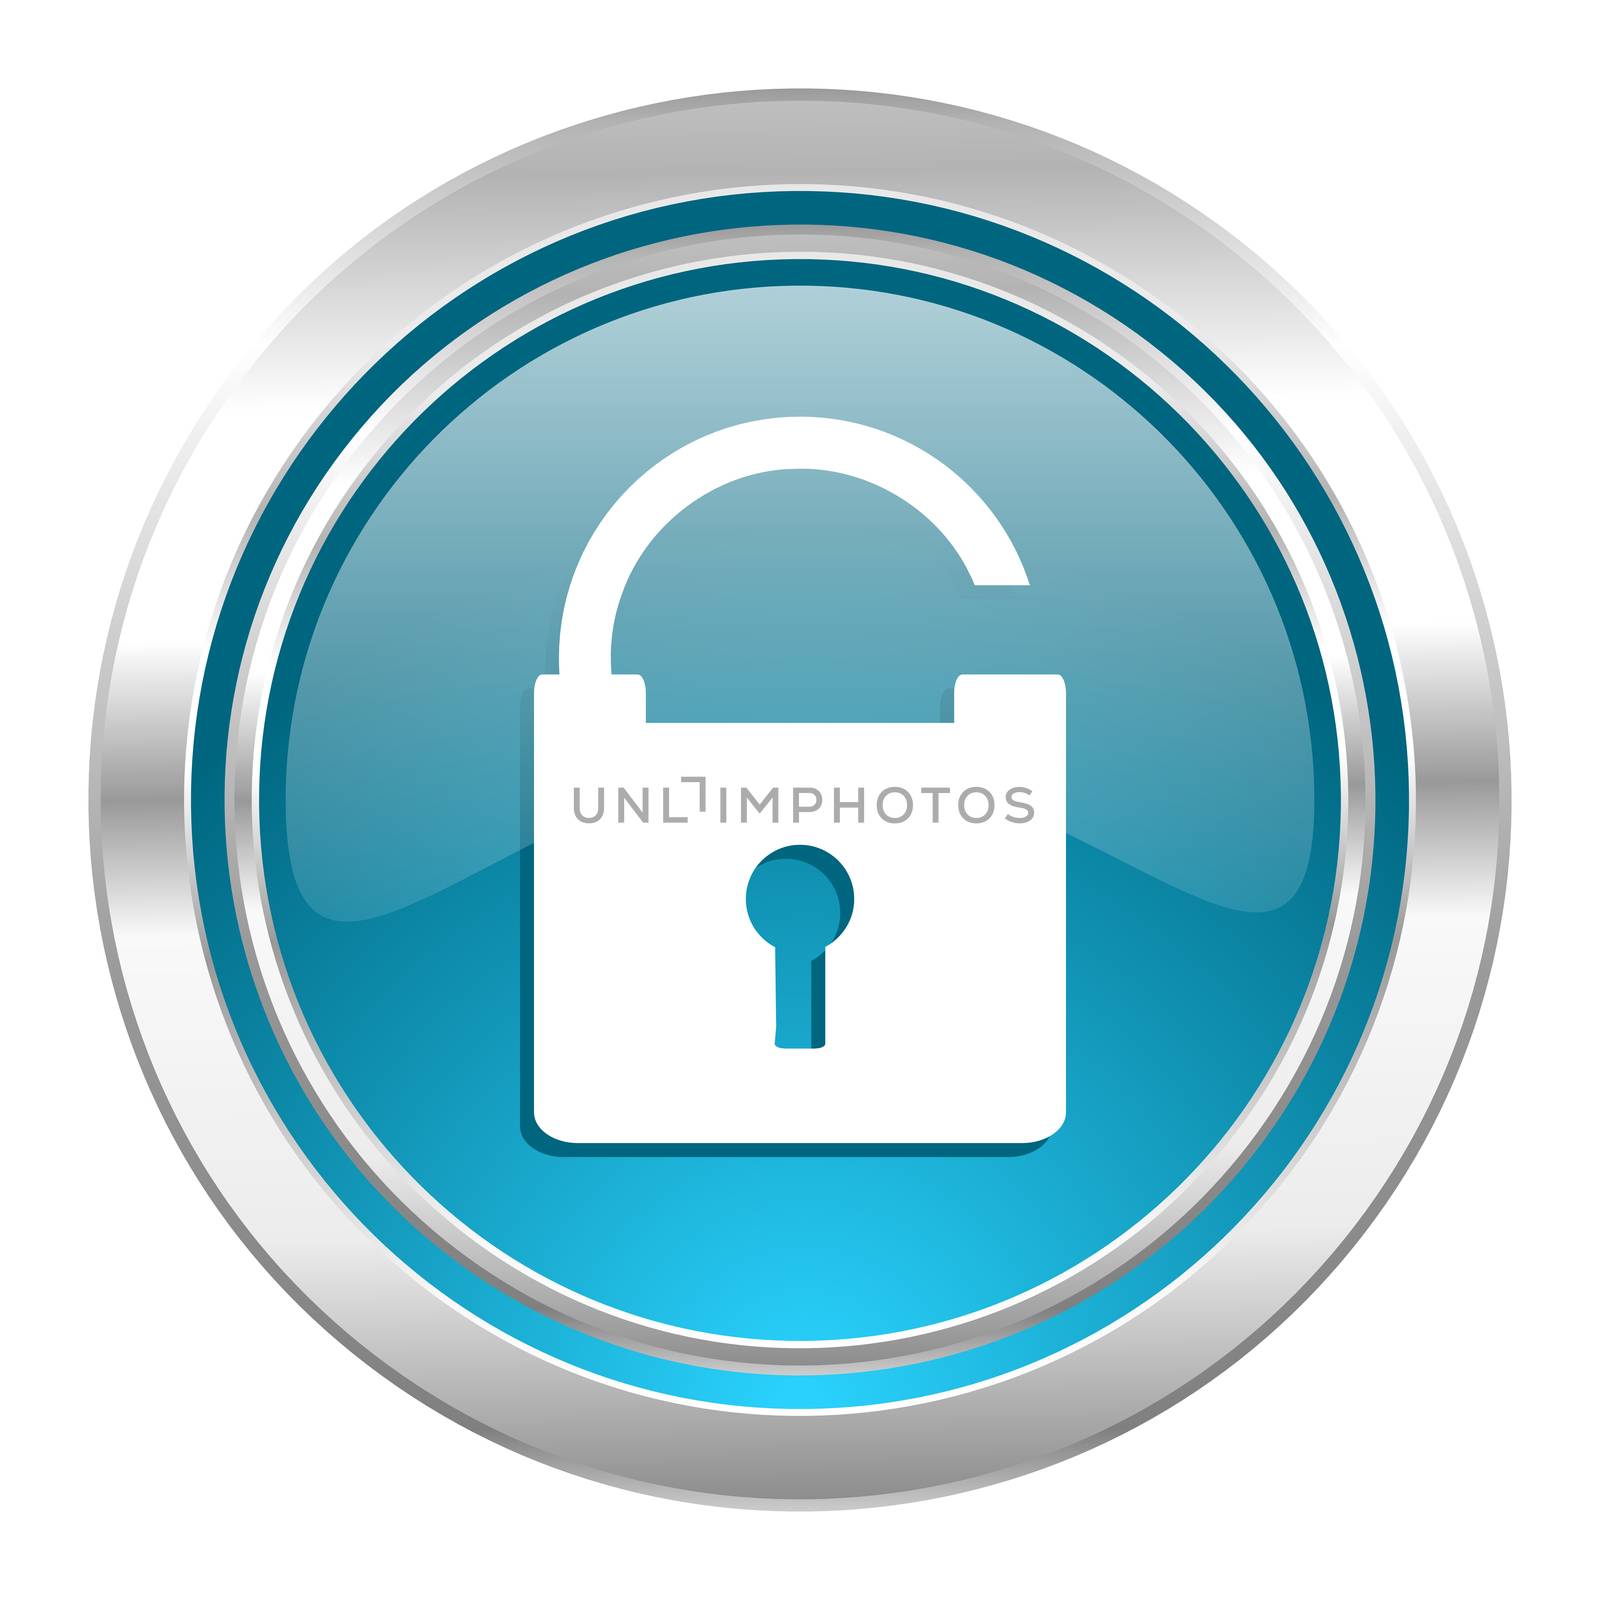 padlock icon, secure sign by alexwhite